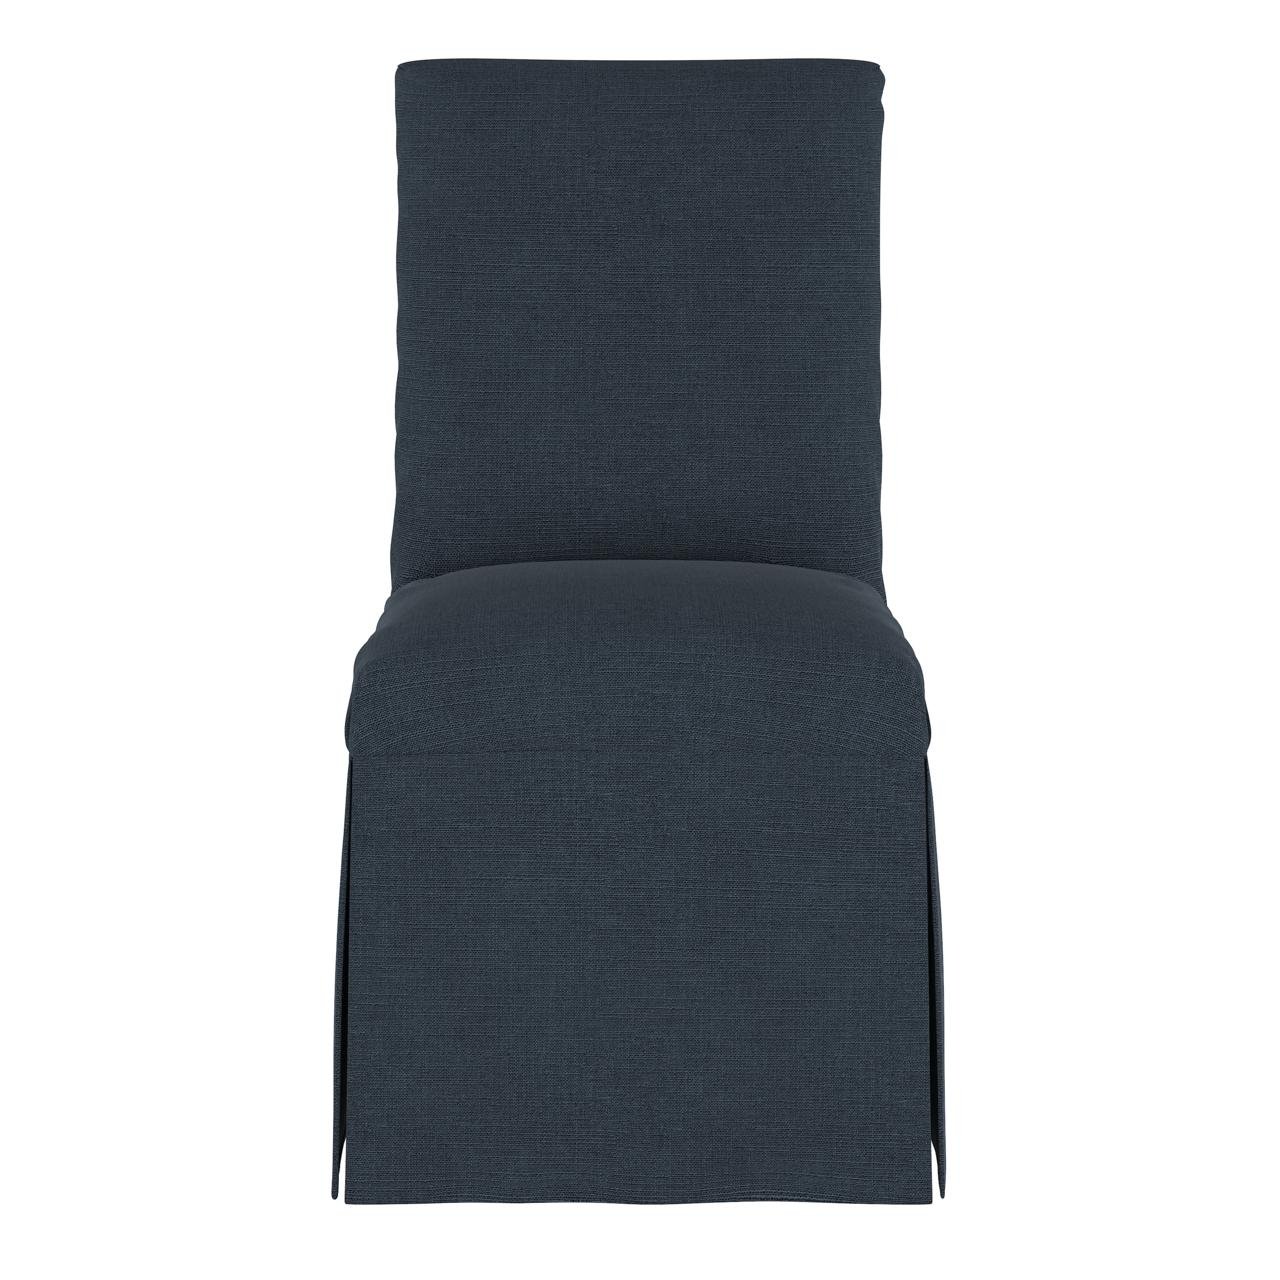 Alice Slipcover Dining Chair in Linen Navy - Image 1